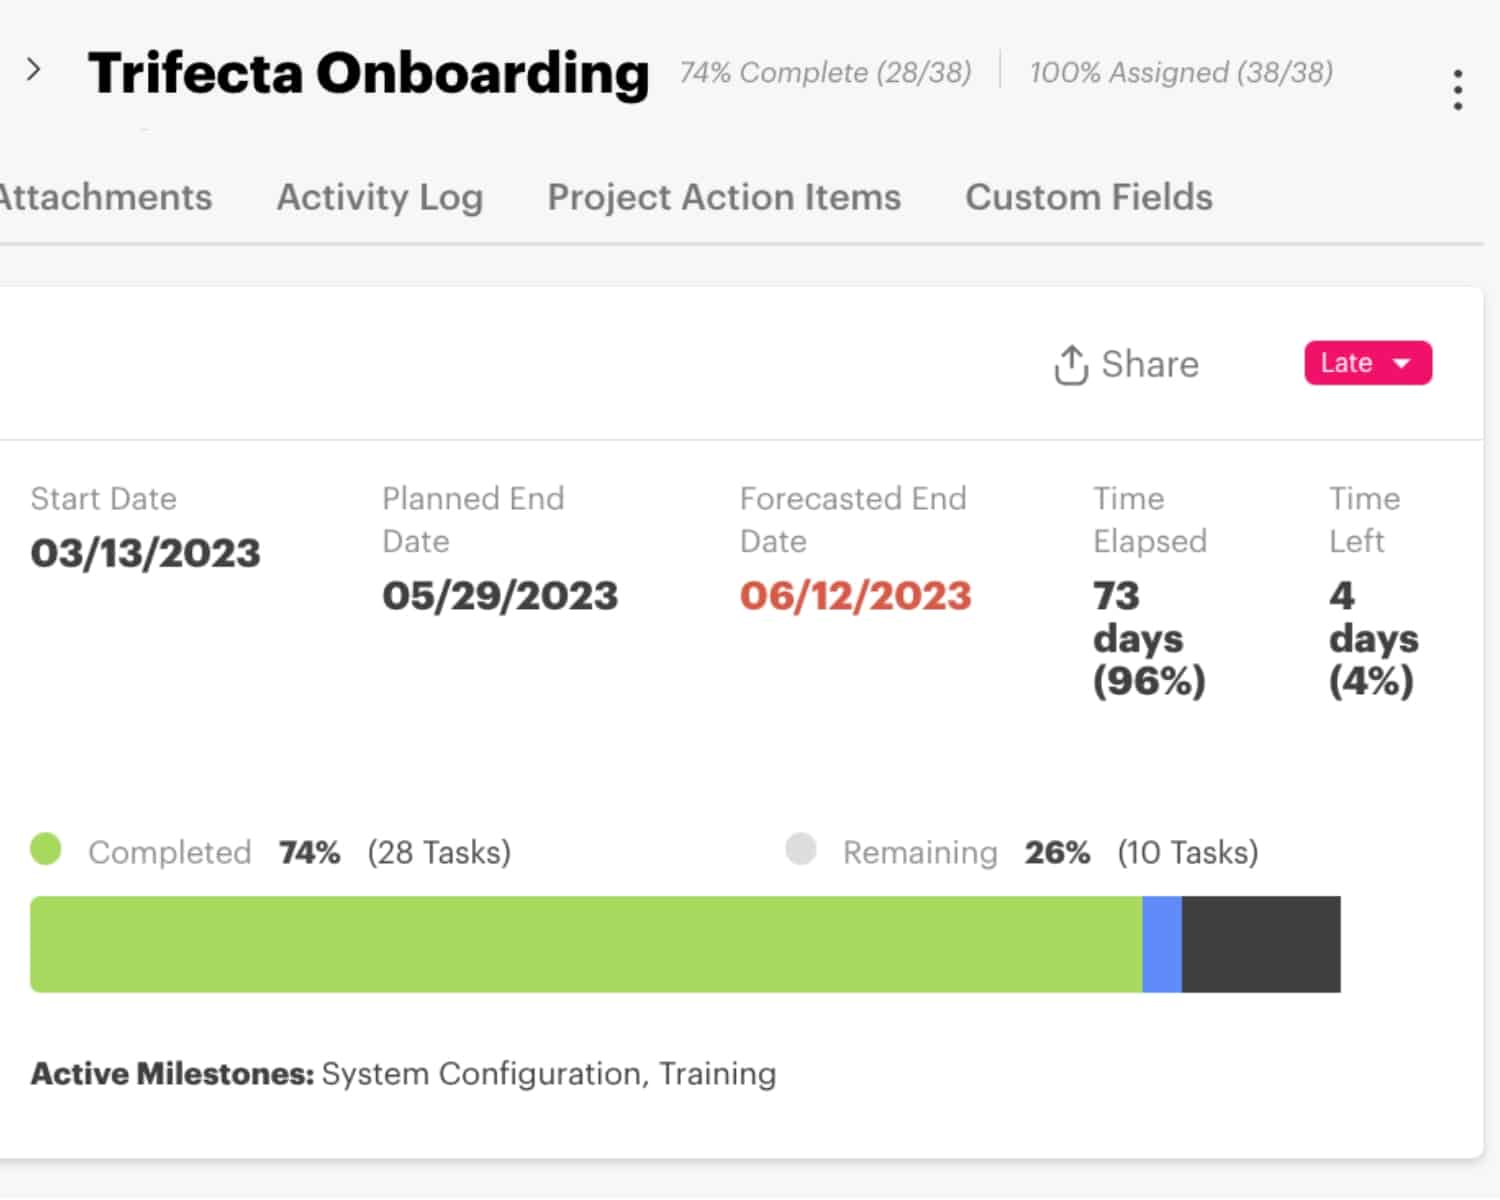 forecast end date square view in GUIDEcx onboarding platform showing a project that is past it's forecasted end date.